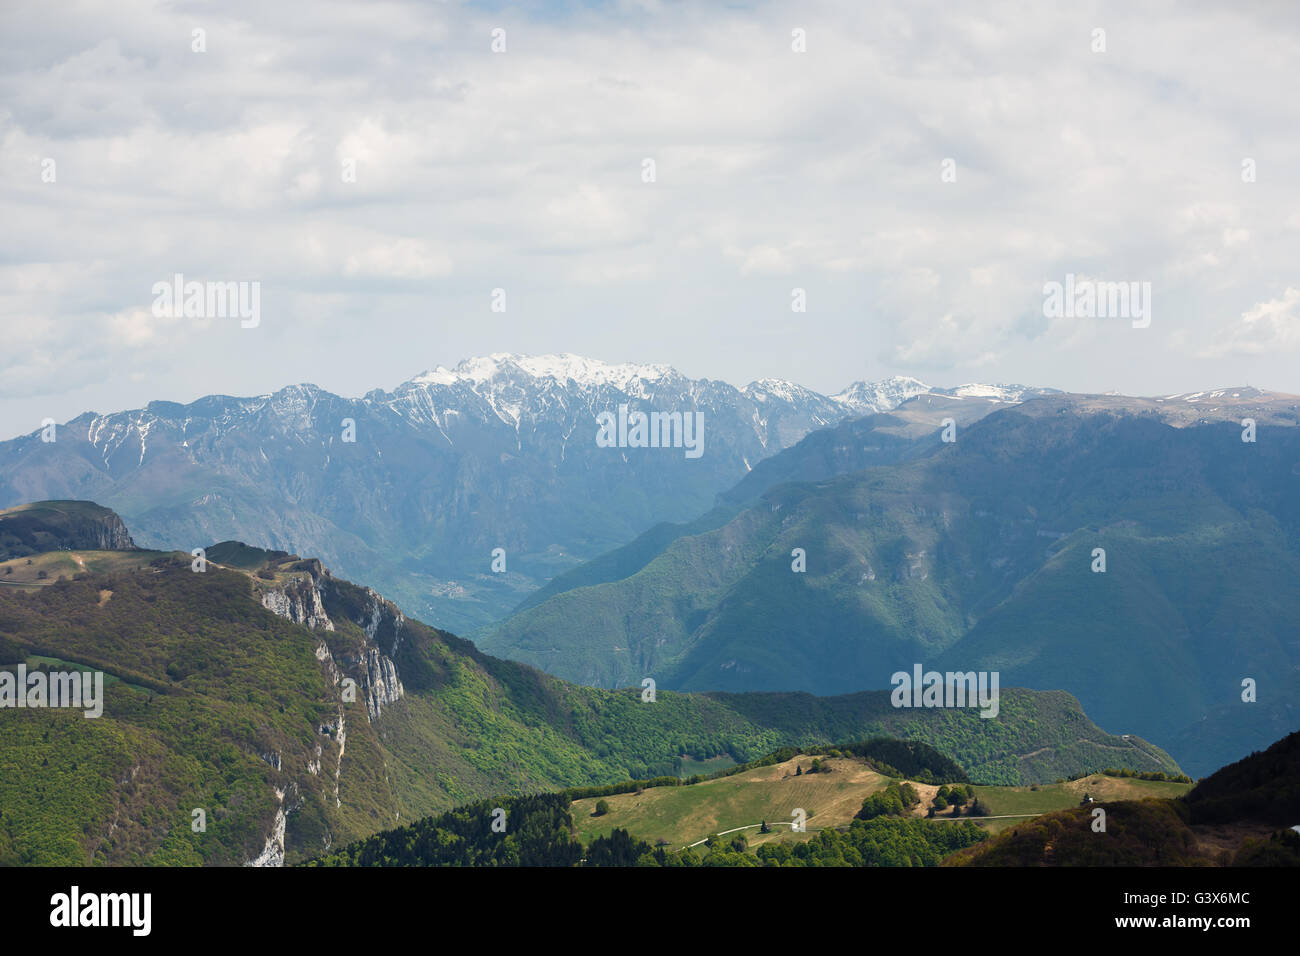 View of the Dolomite mountains, North Italy Stock Photo